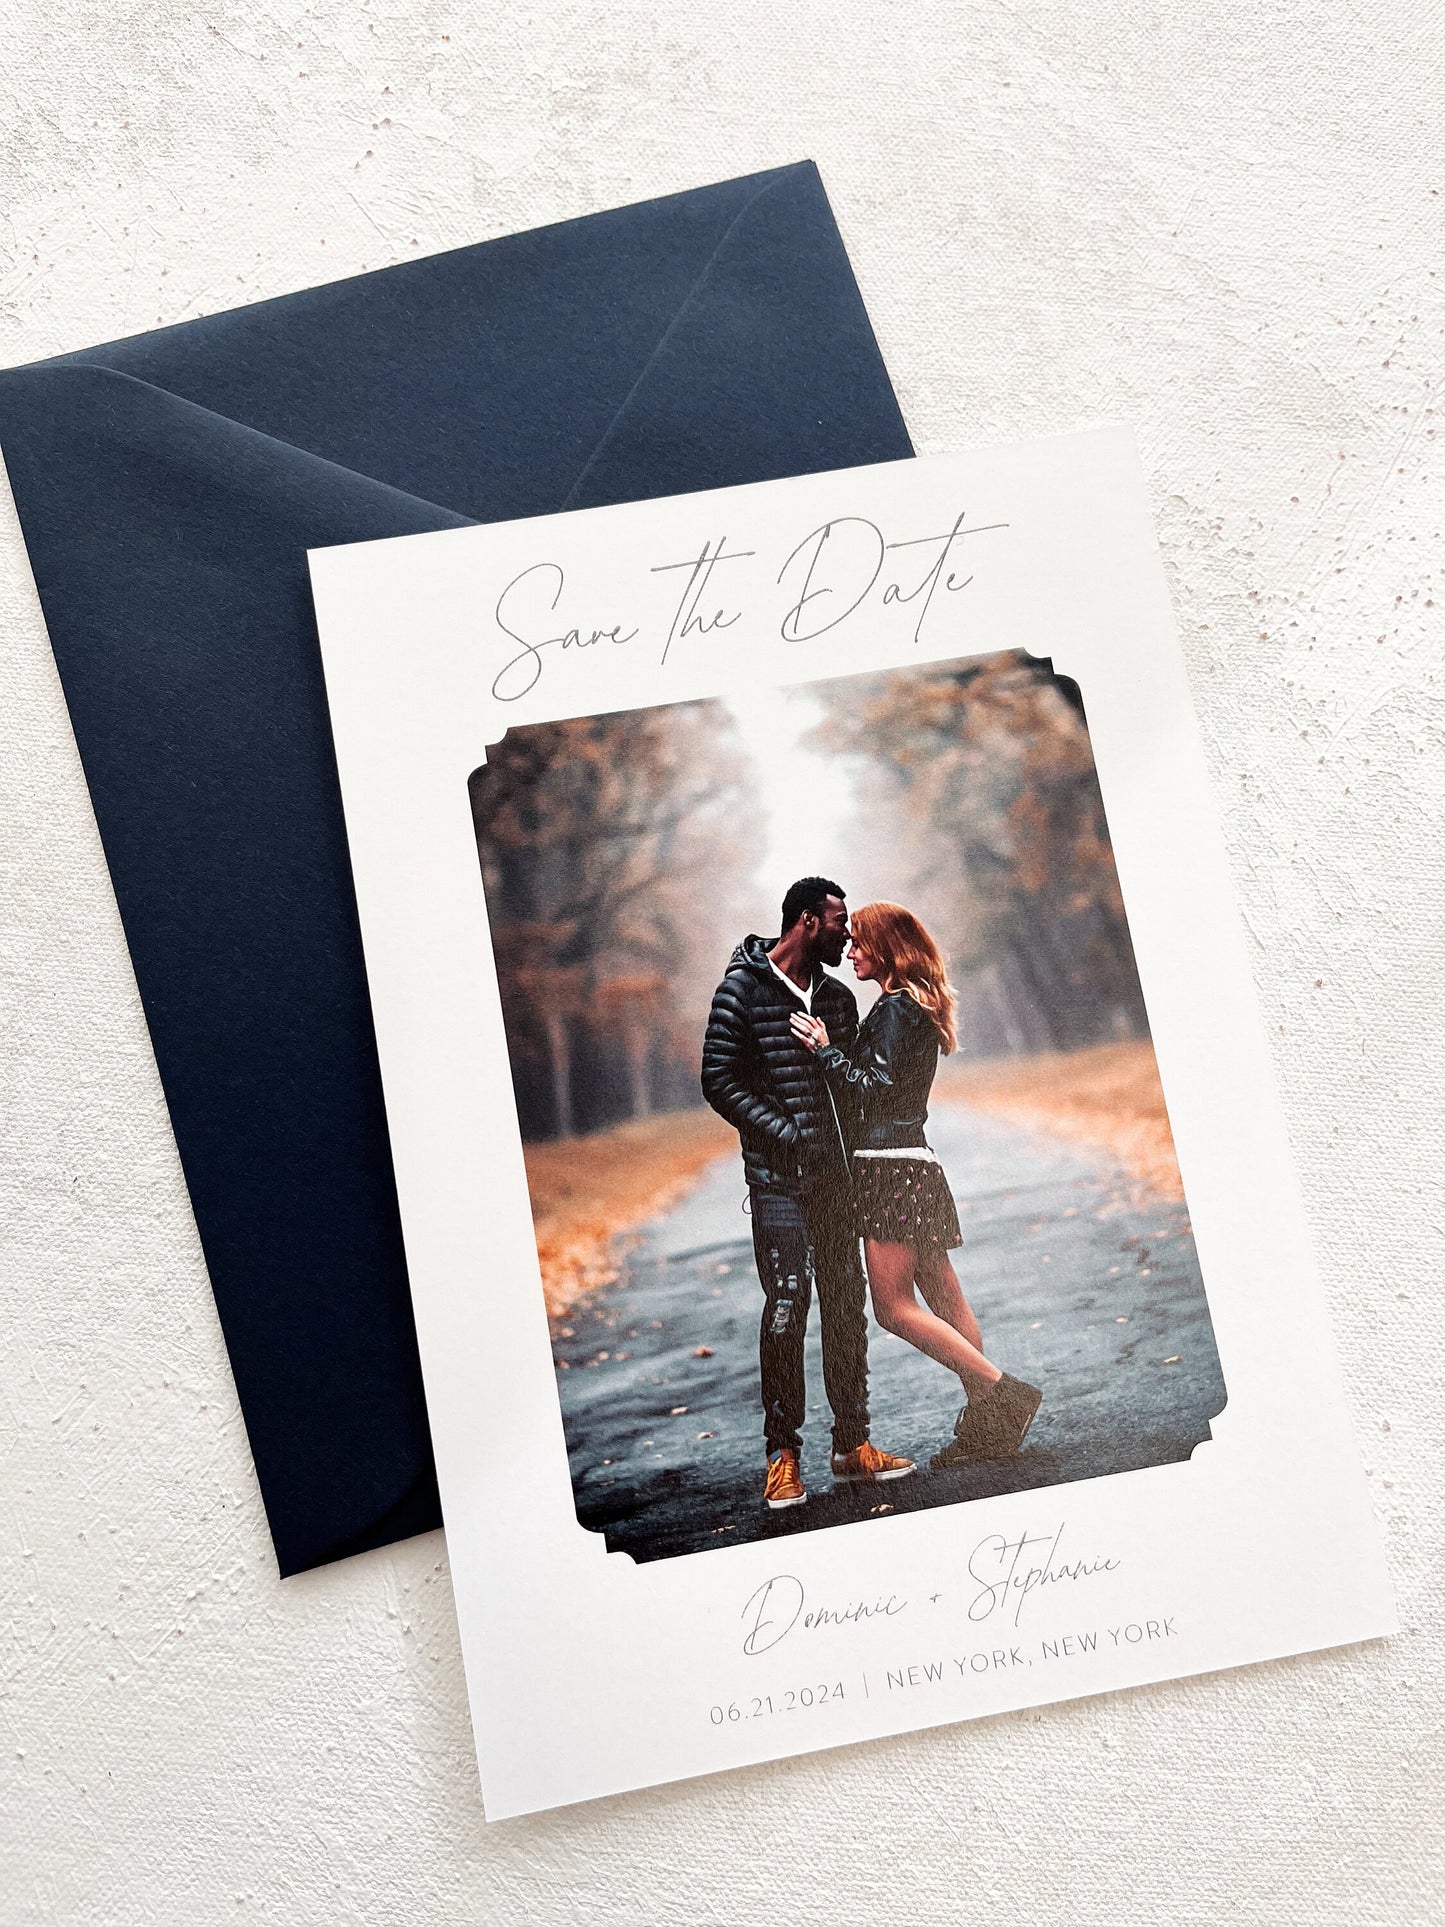 Save the Date - Wedding Save the Date Engagement Invitation Wedding Papers Style -